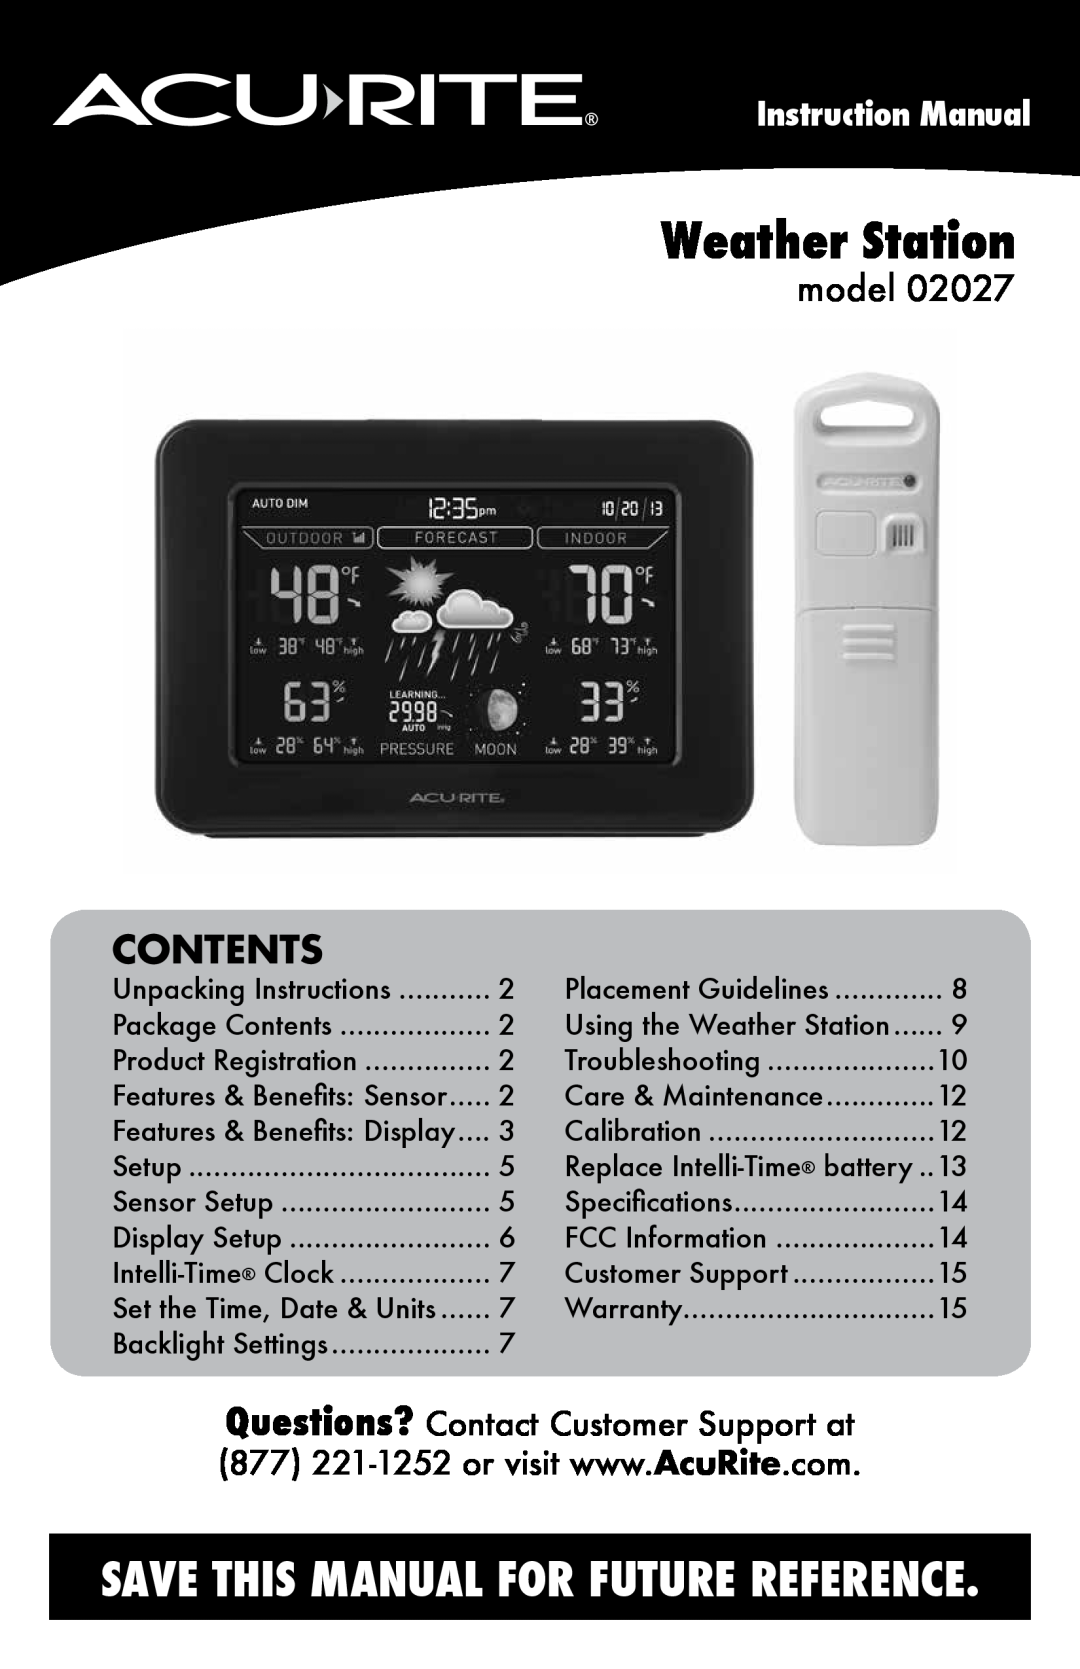 Acu-Rite instruction manual Contents, model 02027/02022WB, Instruction Manual, Weather Station 